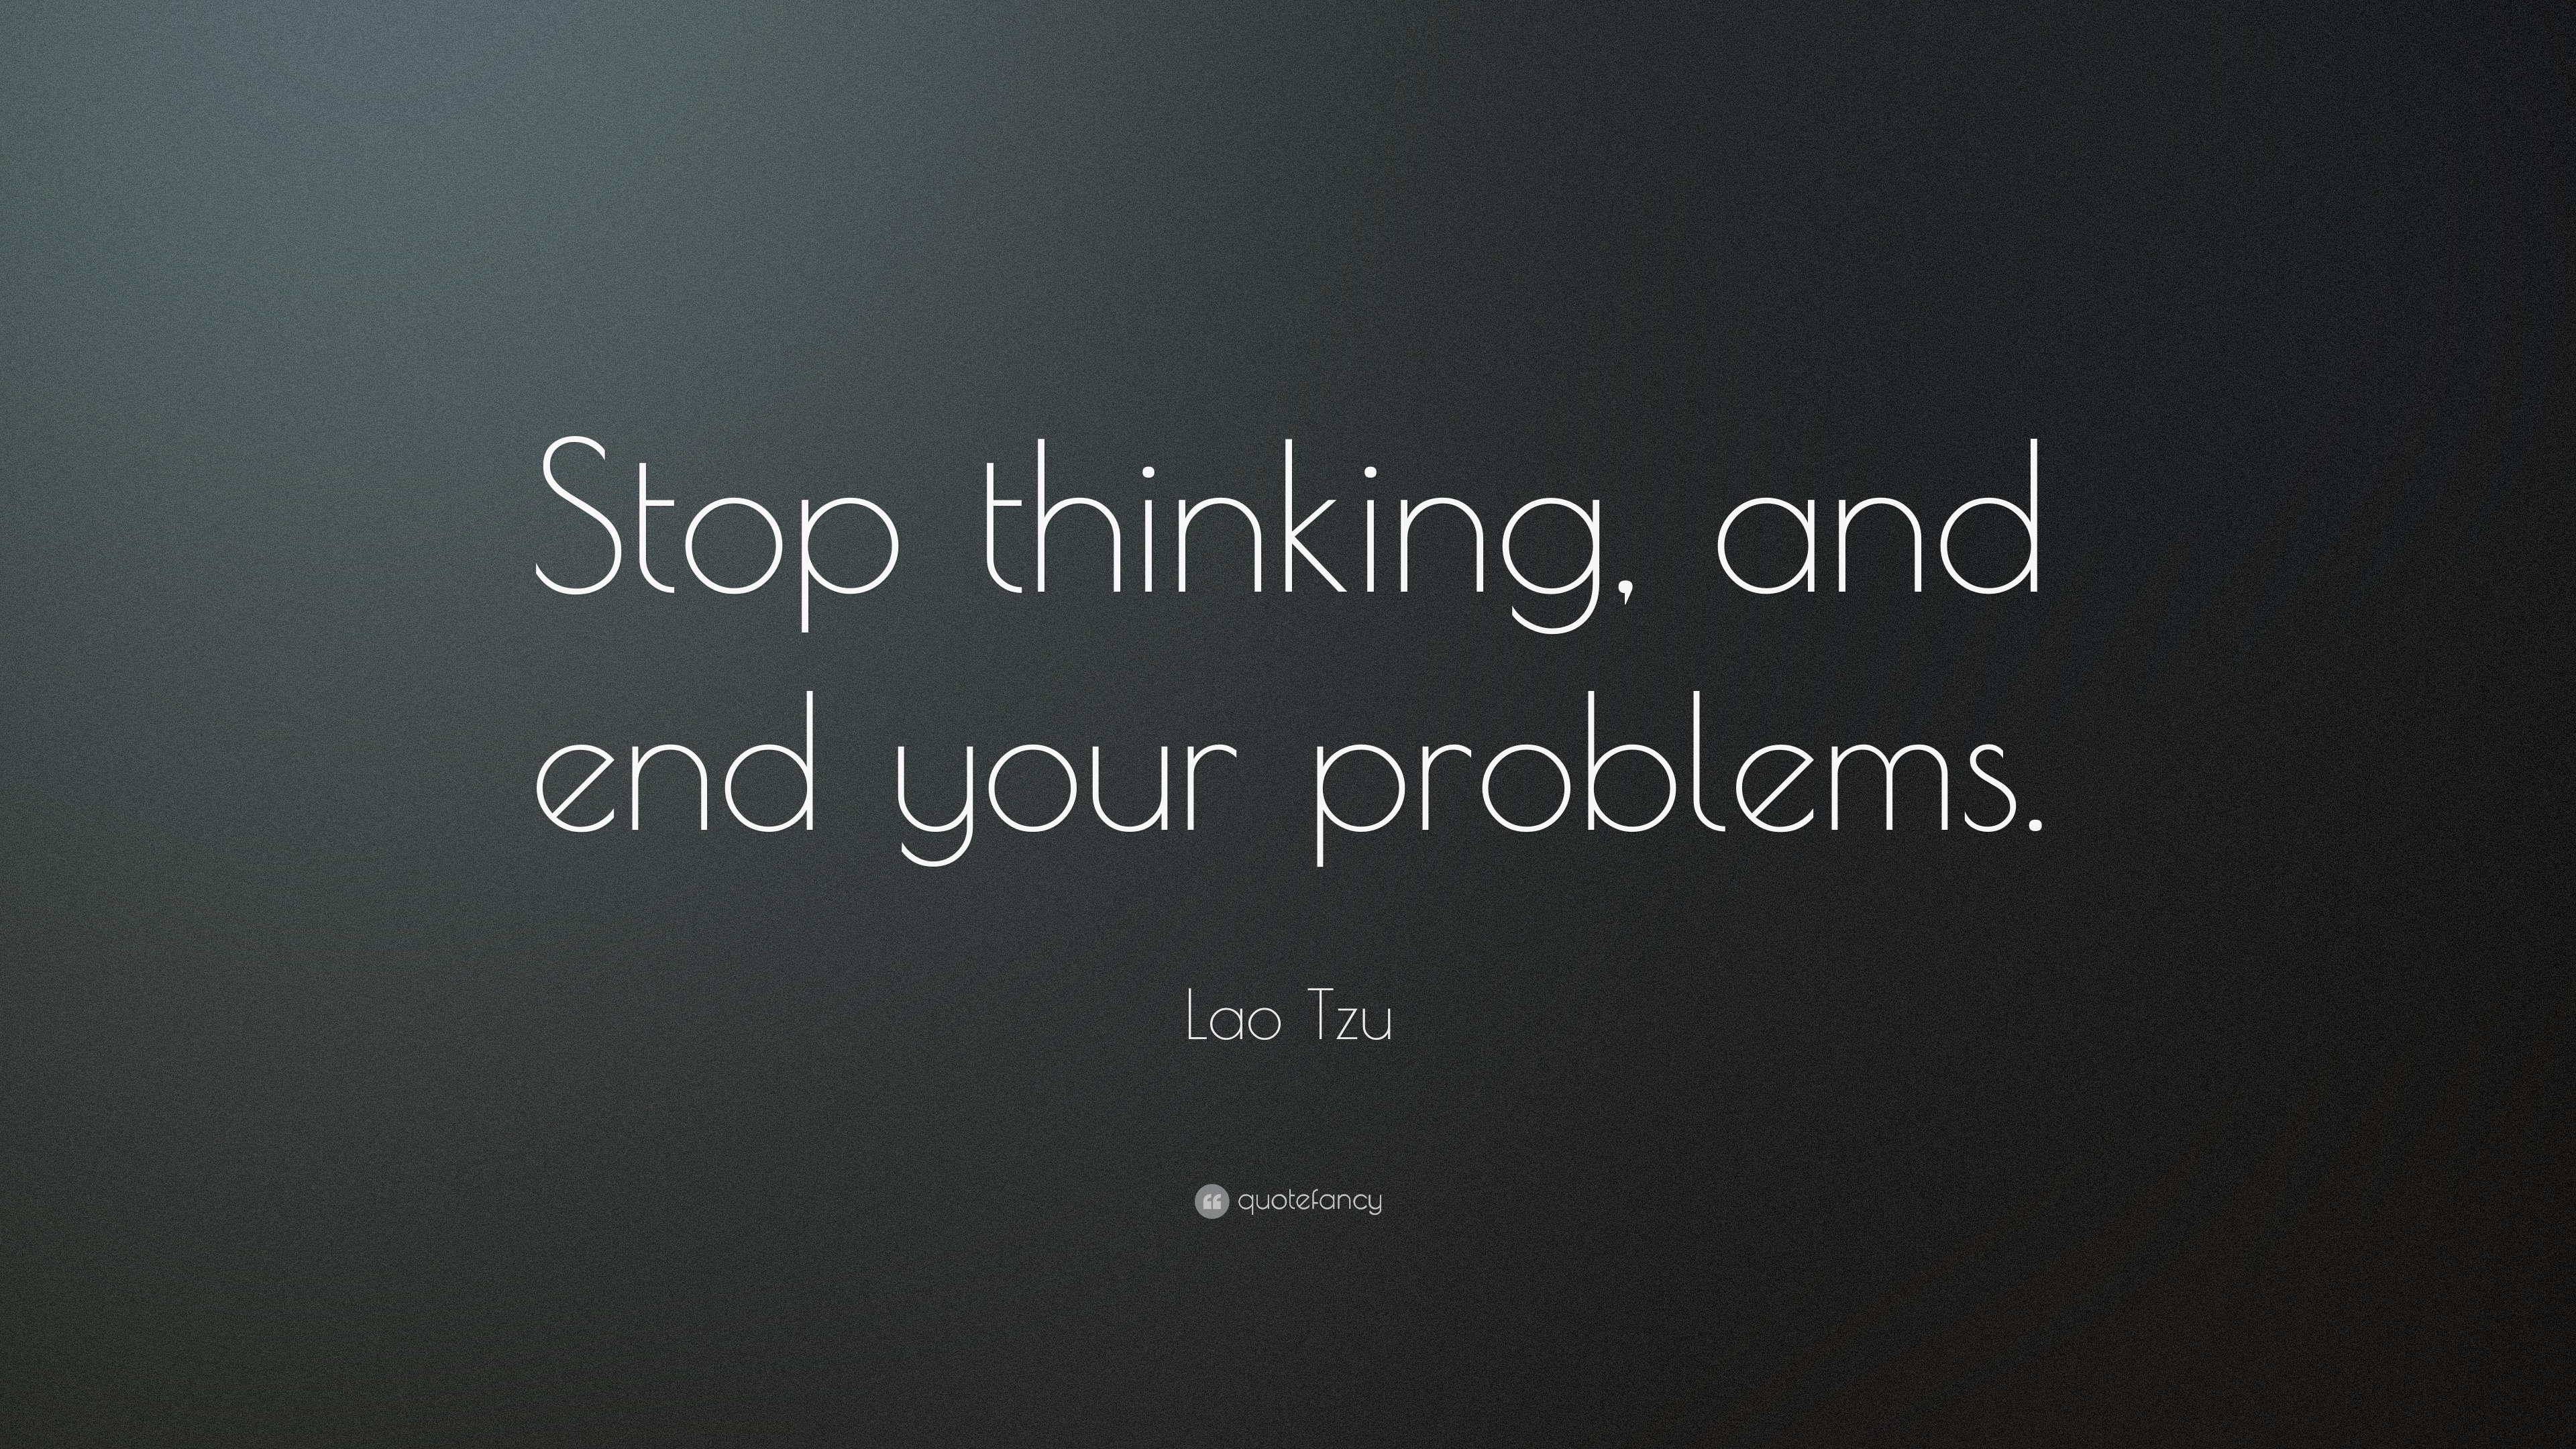 Stop thinking, and end your problems